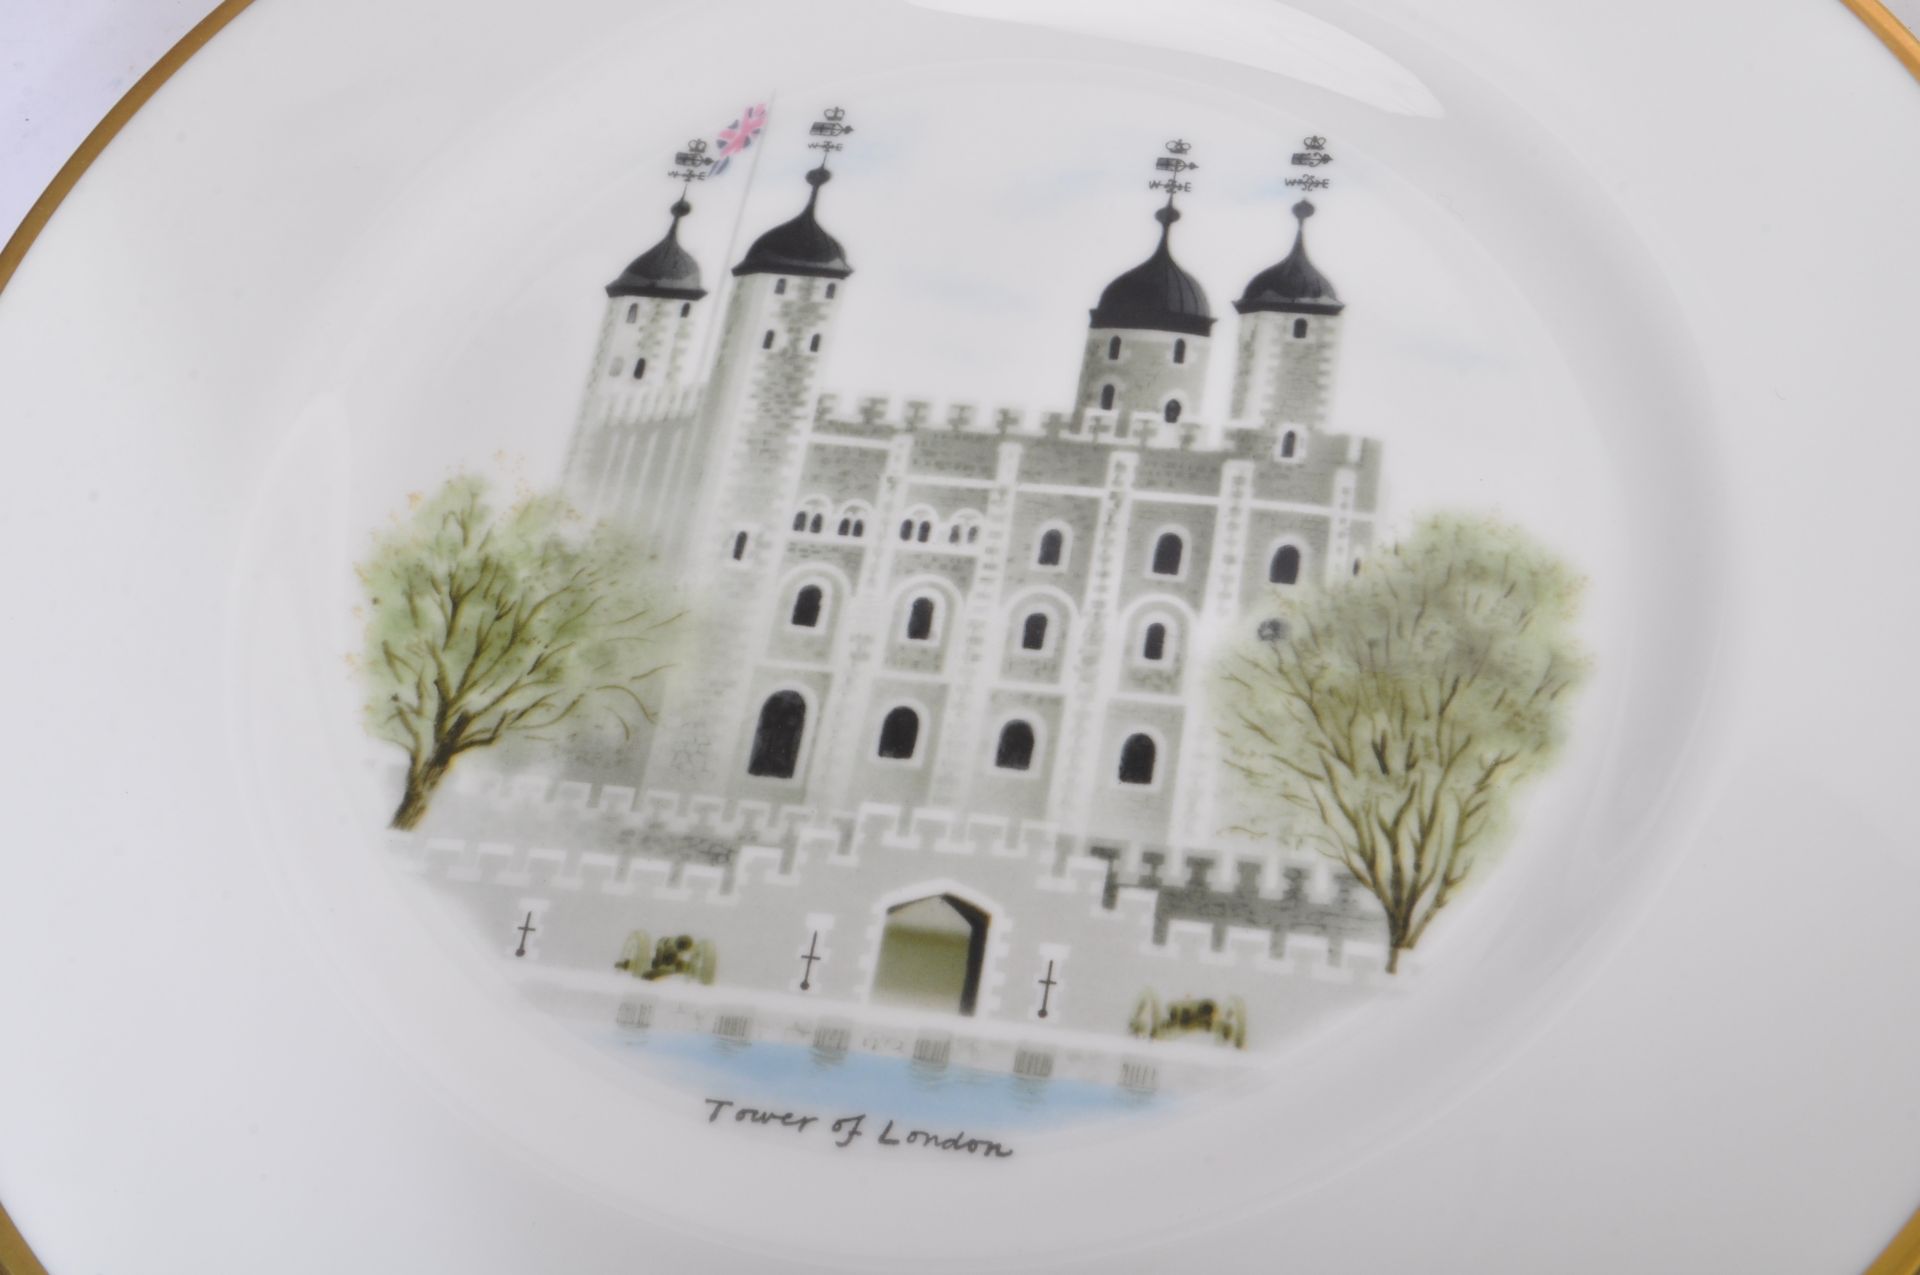 WEDGWOOD - CASTLE & COUNTRY HOUSE PORCELAIN PLATES - Image 9 of 11